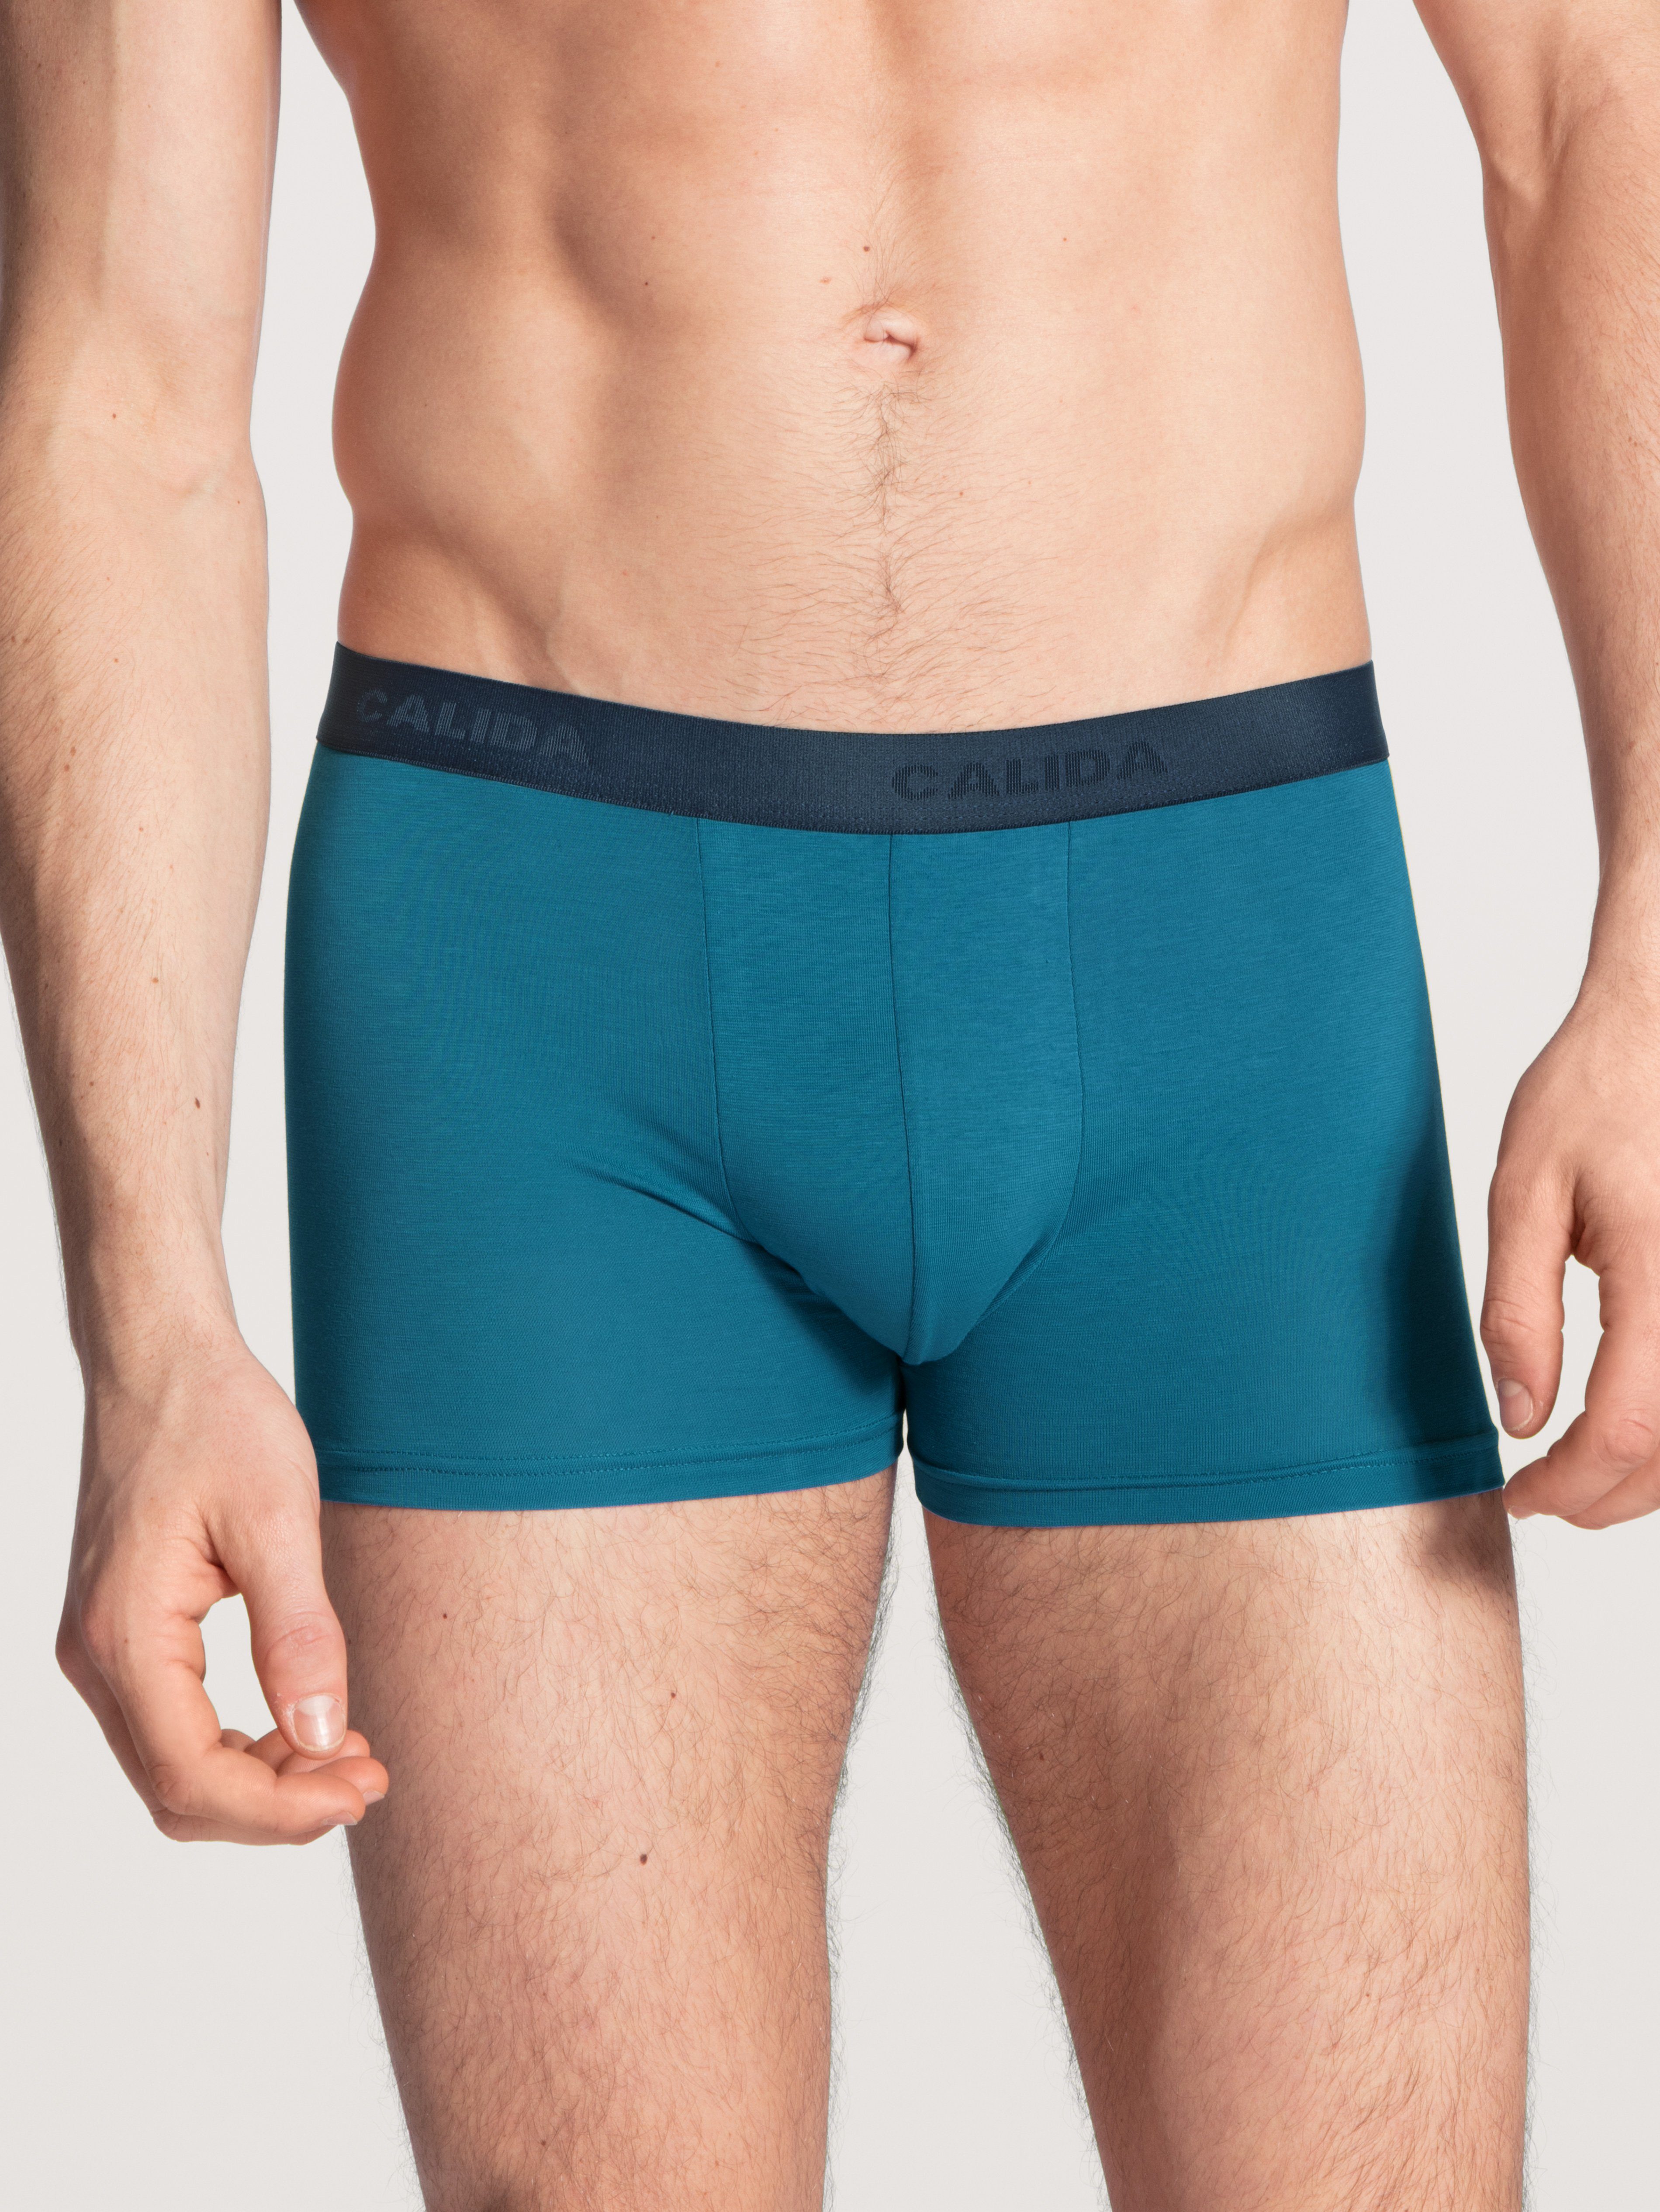 Natural Jersey-Qualität formstabile Benefit CALIDA Single Boxershorts 3-St) mutlicolor Boxer-Brief (Packung,